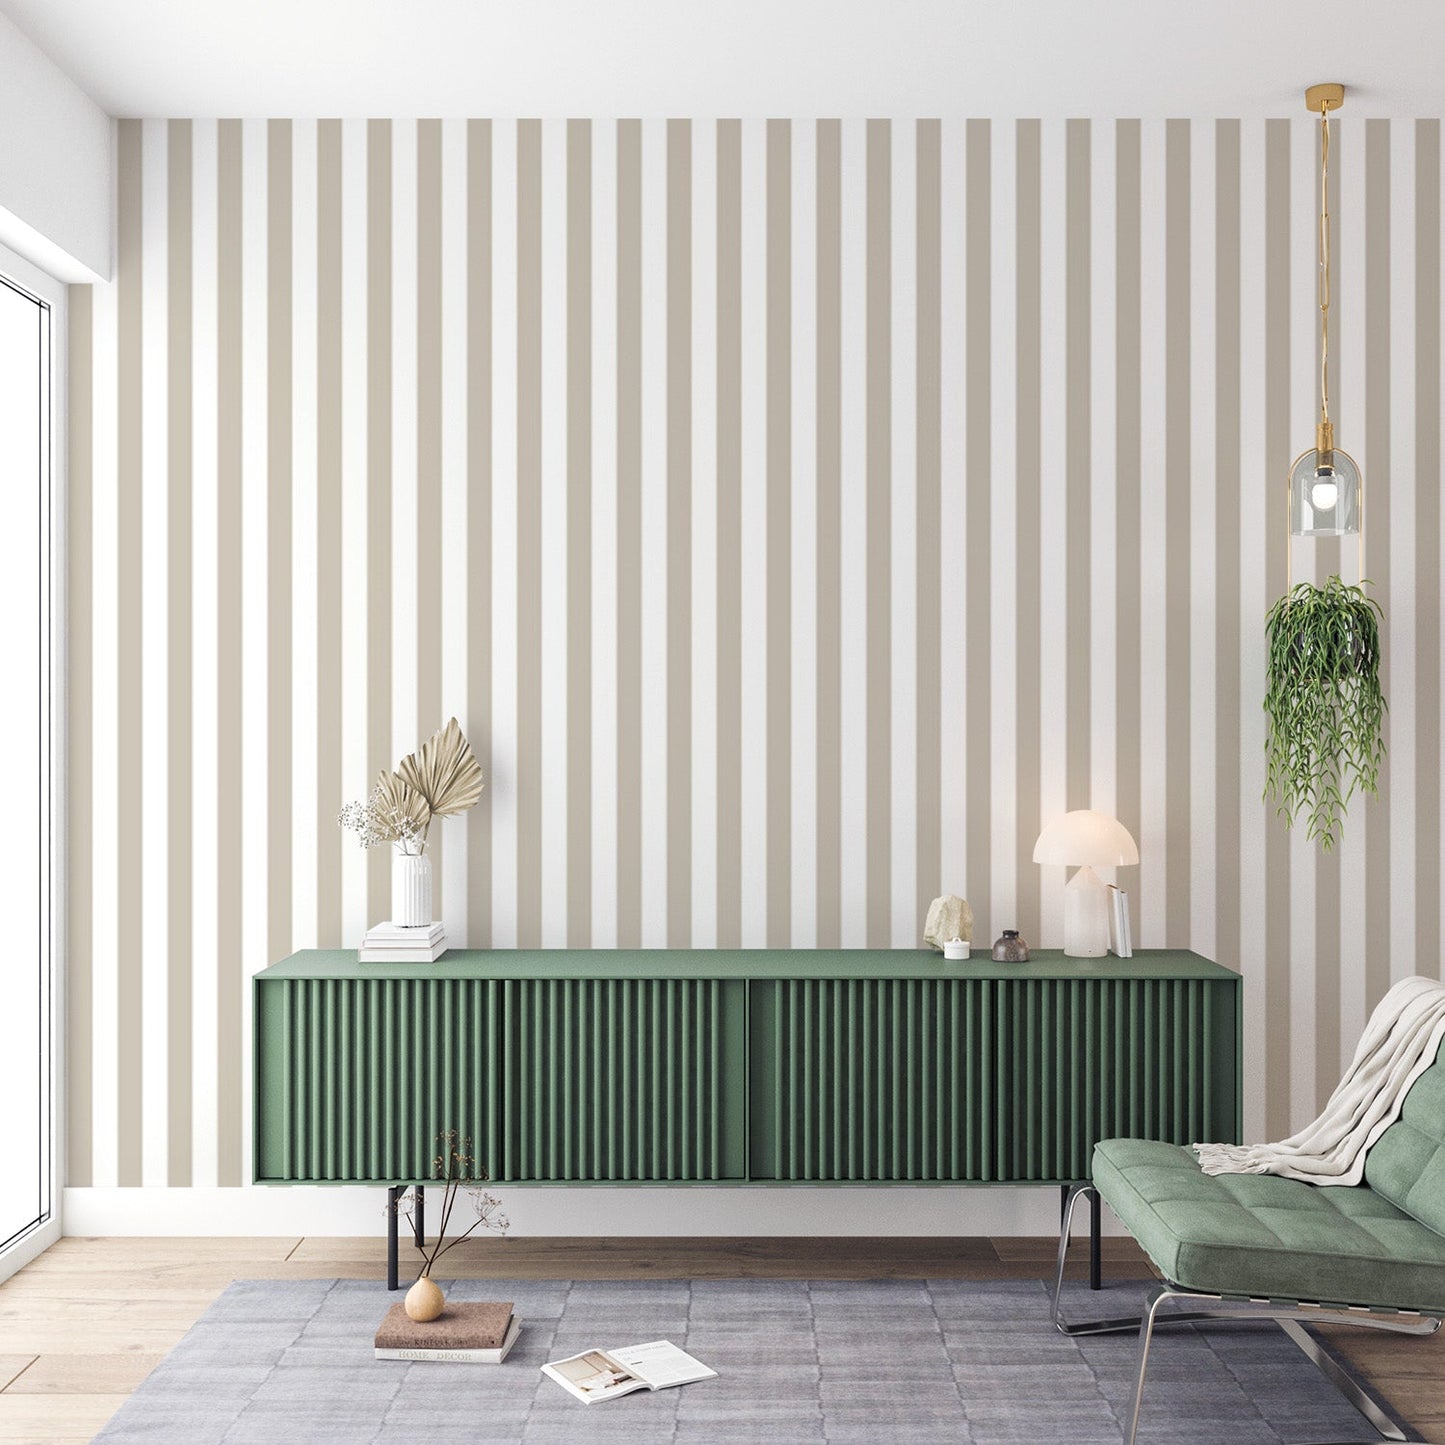 Striped Wallpaper | Beige and White Vertical